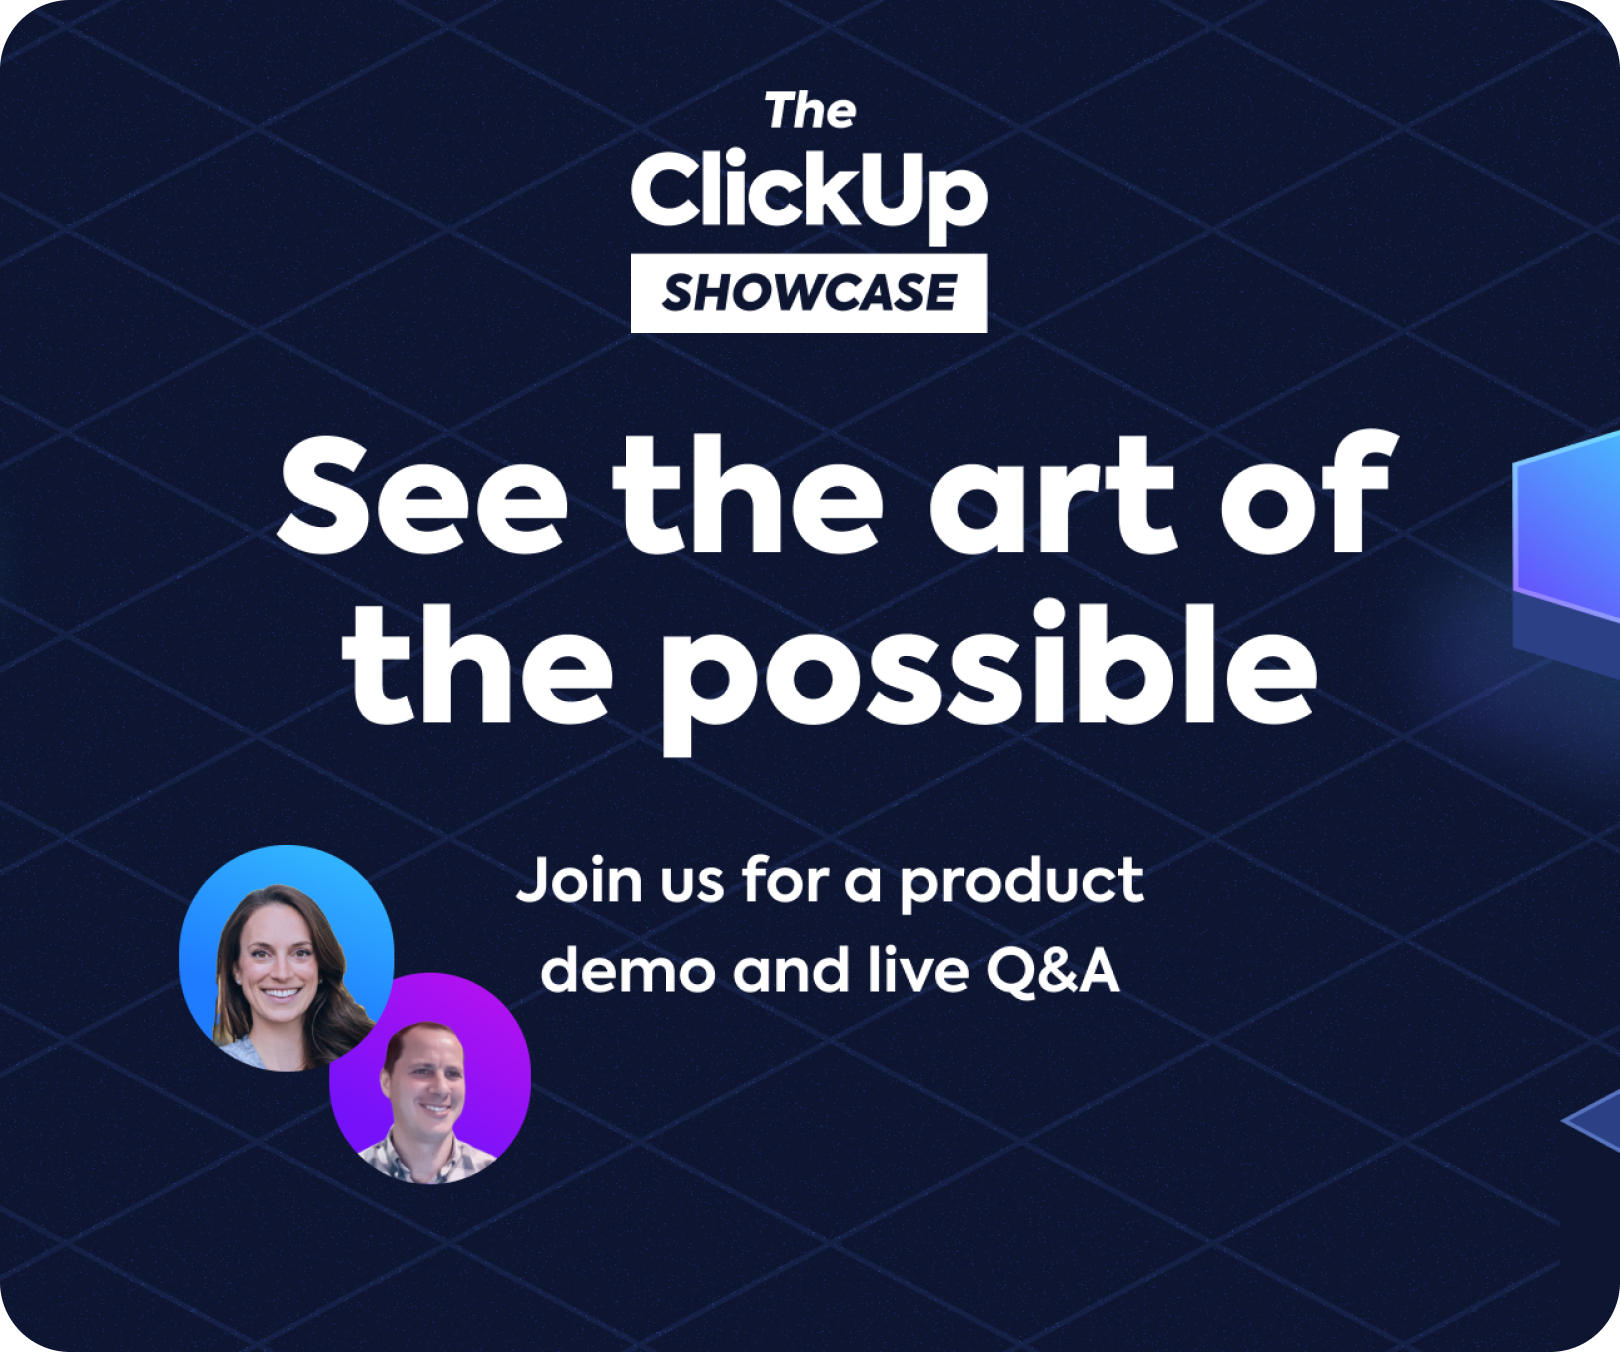 Join the ClickUp Showcase